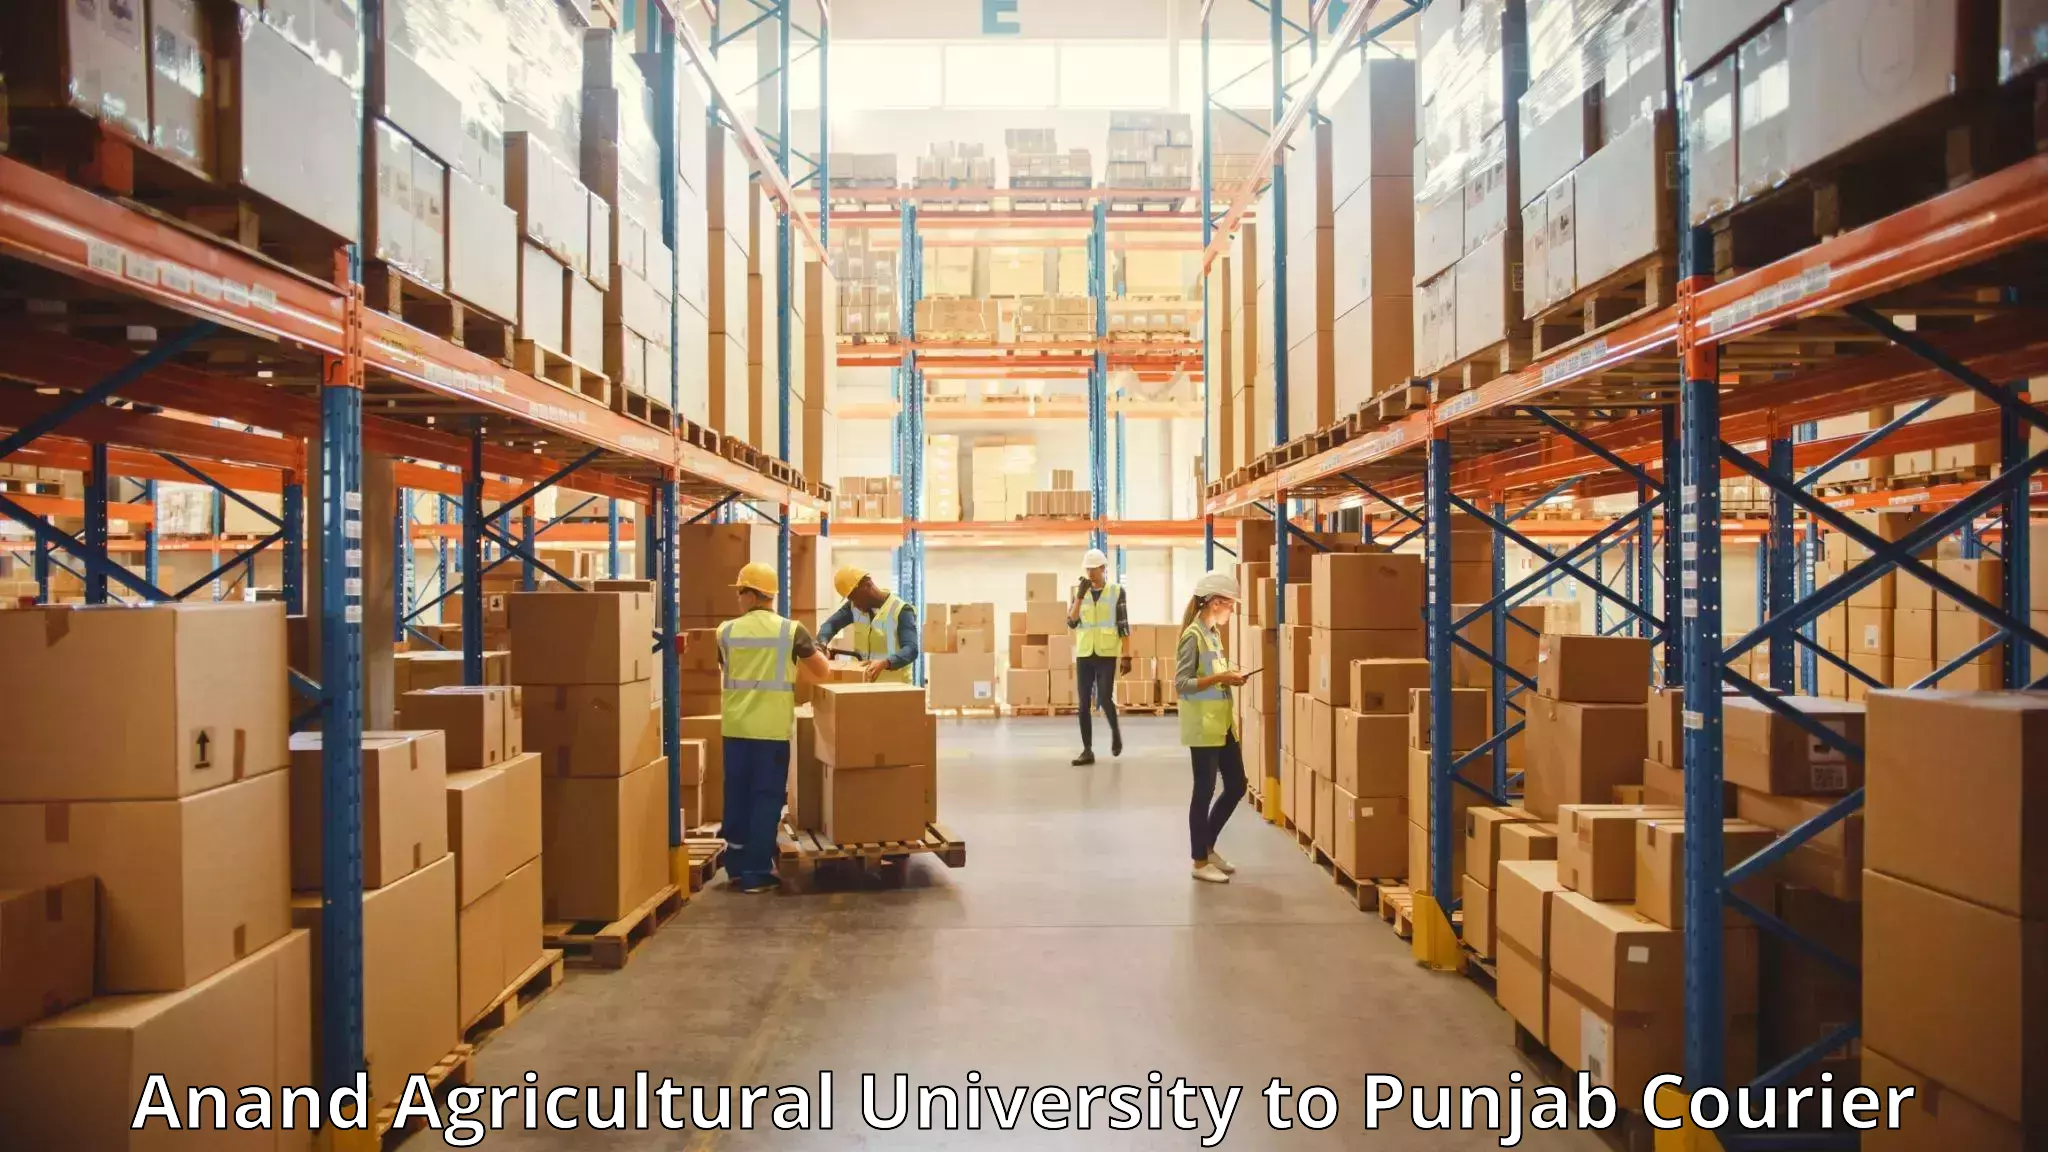 Train station baggage courier Anand Agricultural University to Punjab